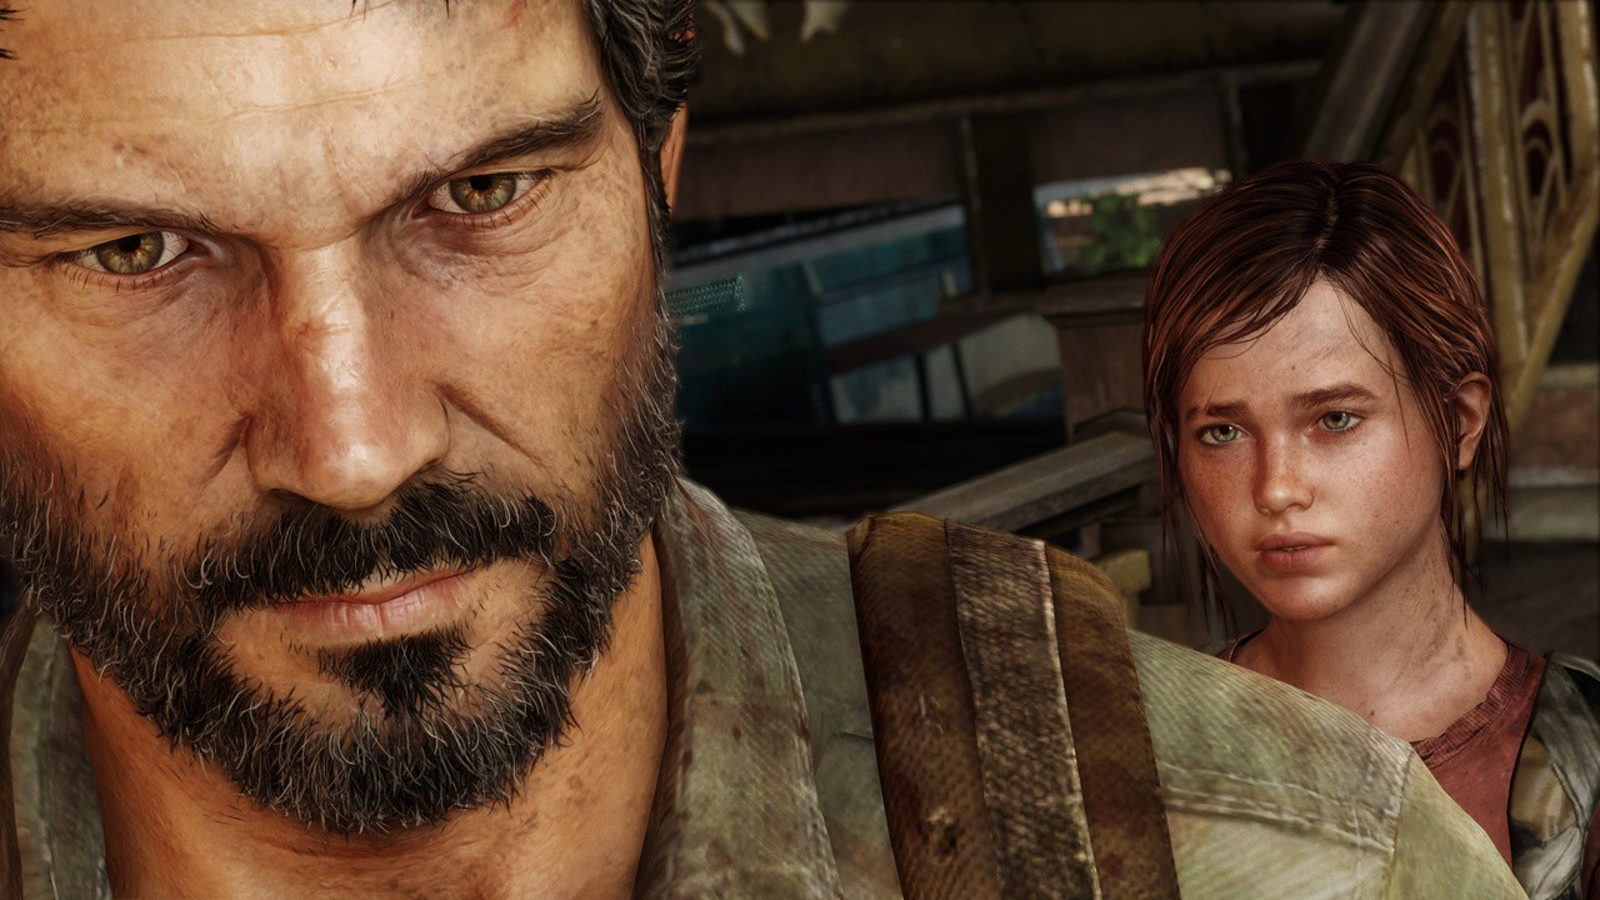 The Last Of Us Part 1 WON'T LAUNCH After Patch 1.0.4 on Steam Deck